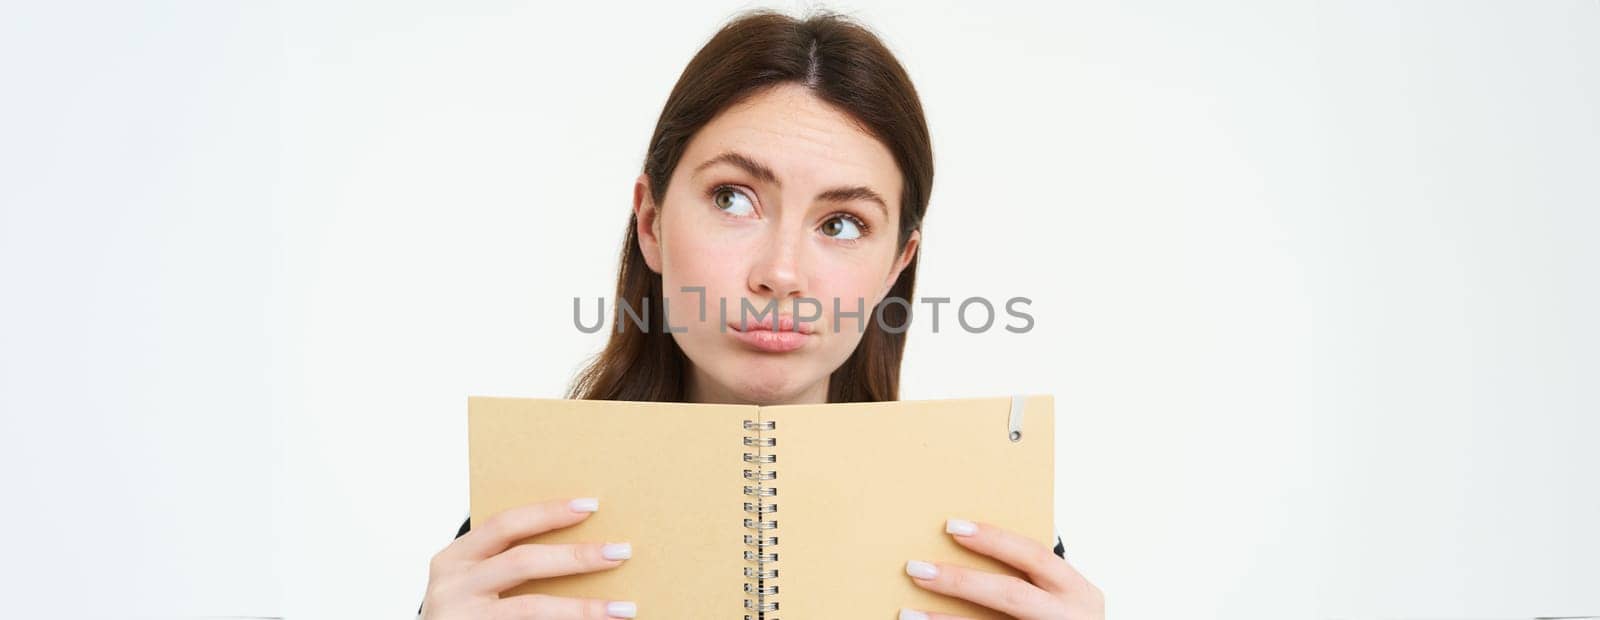 Portrait of thinking girl holding a notebook. Young woman with thoughtful face, holding weekly planner, checks her schedule, writes notes in her memo book, stands over white background.